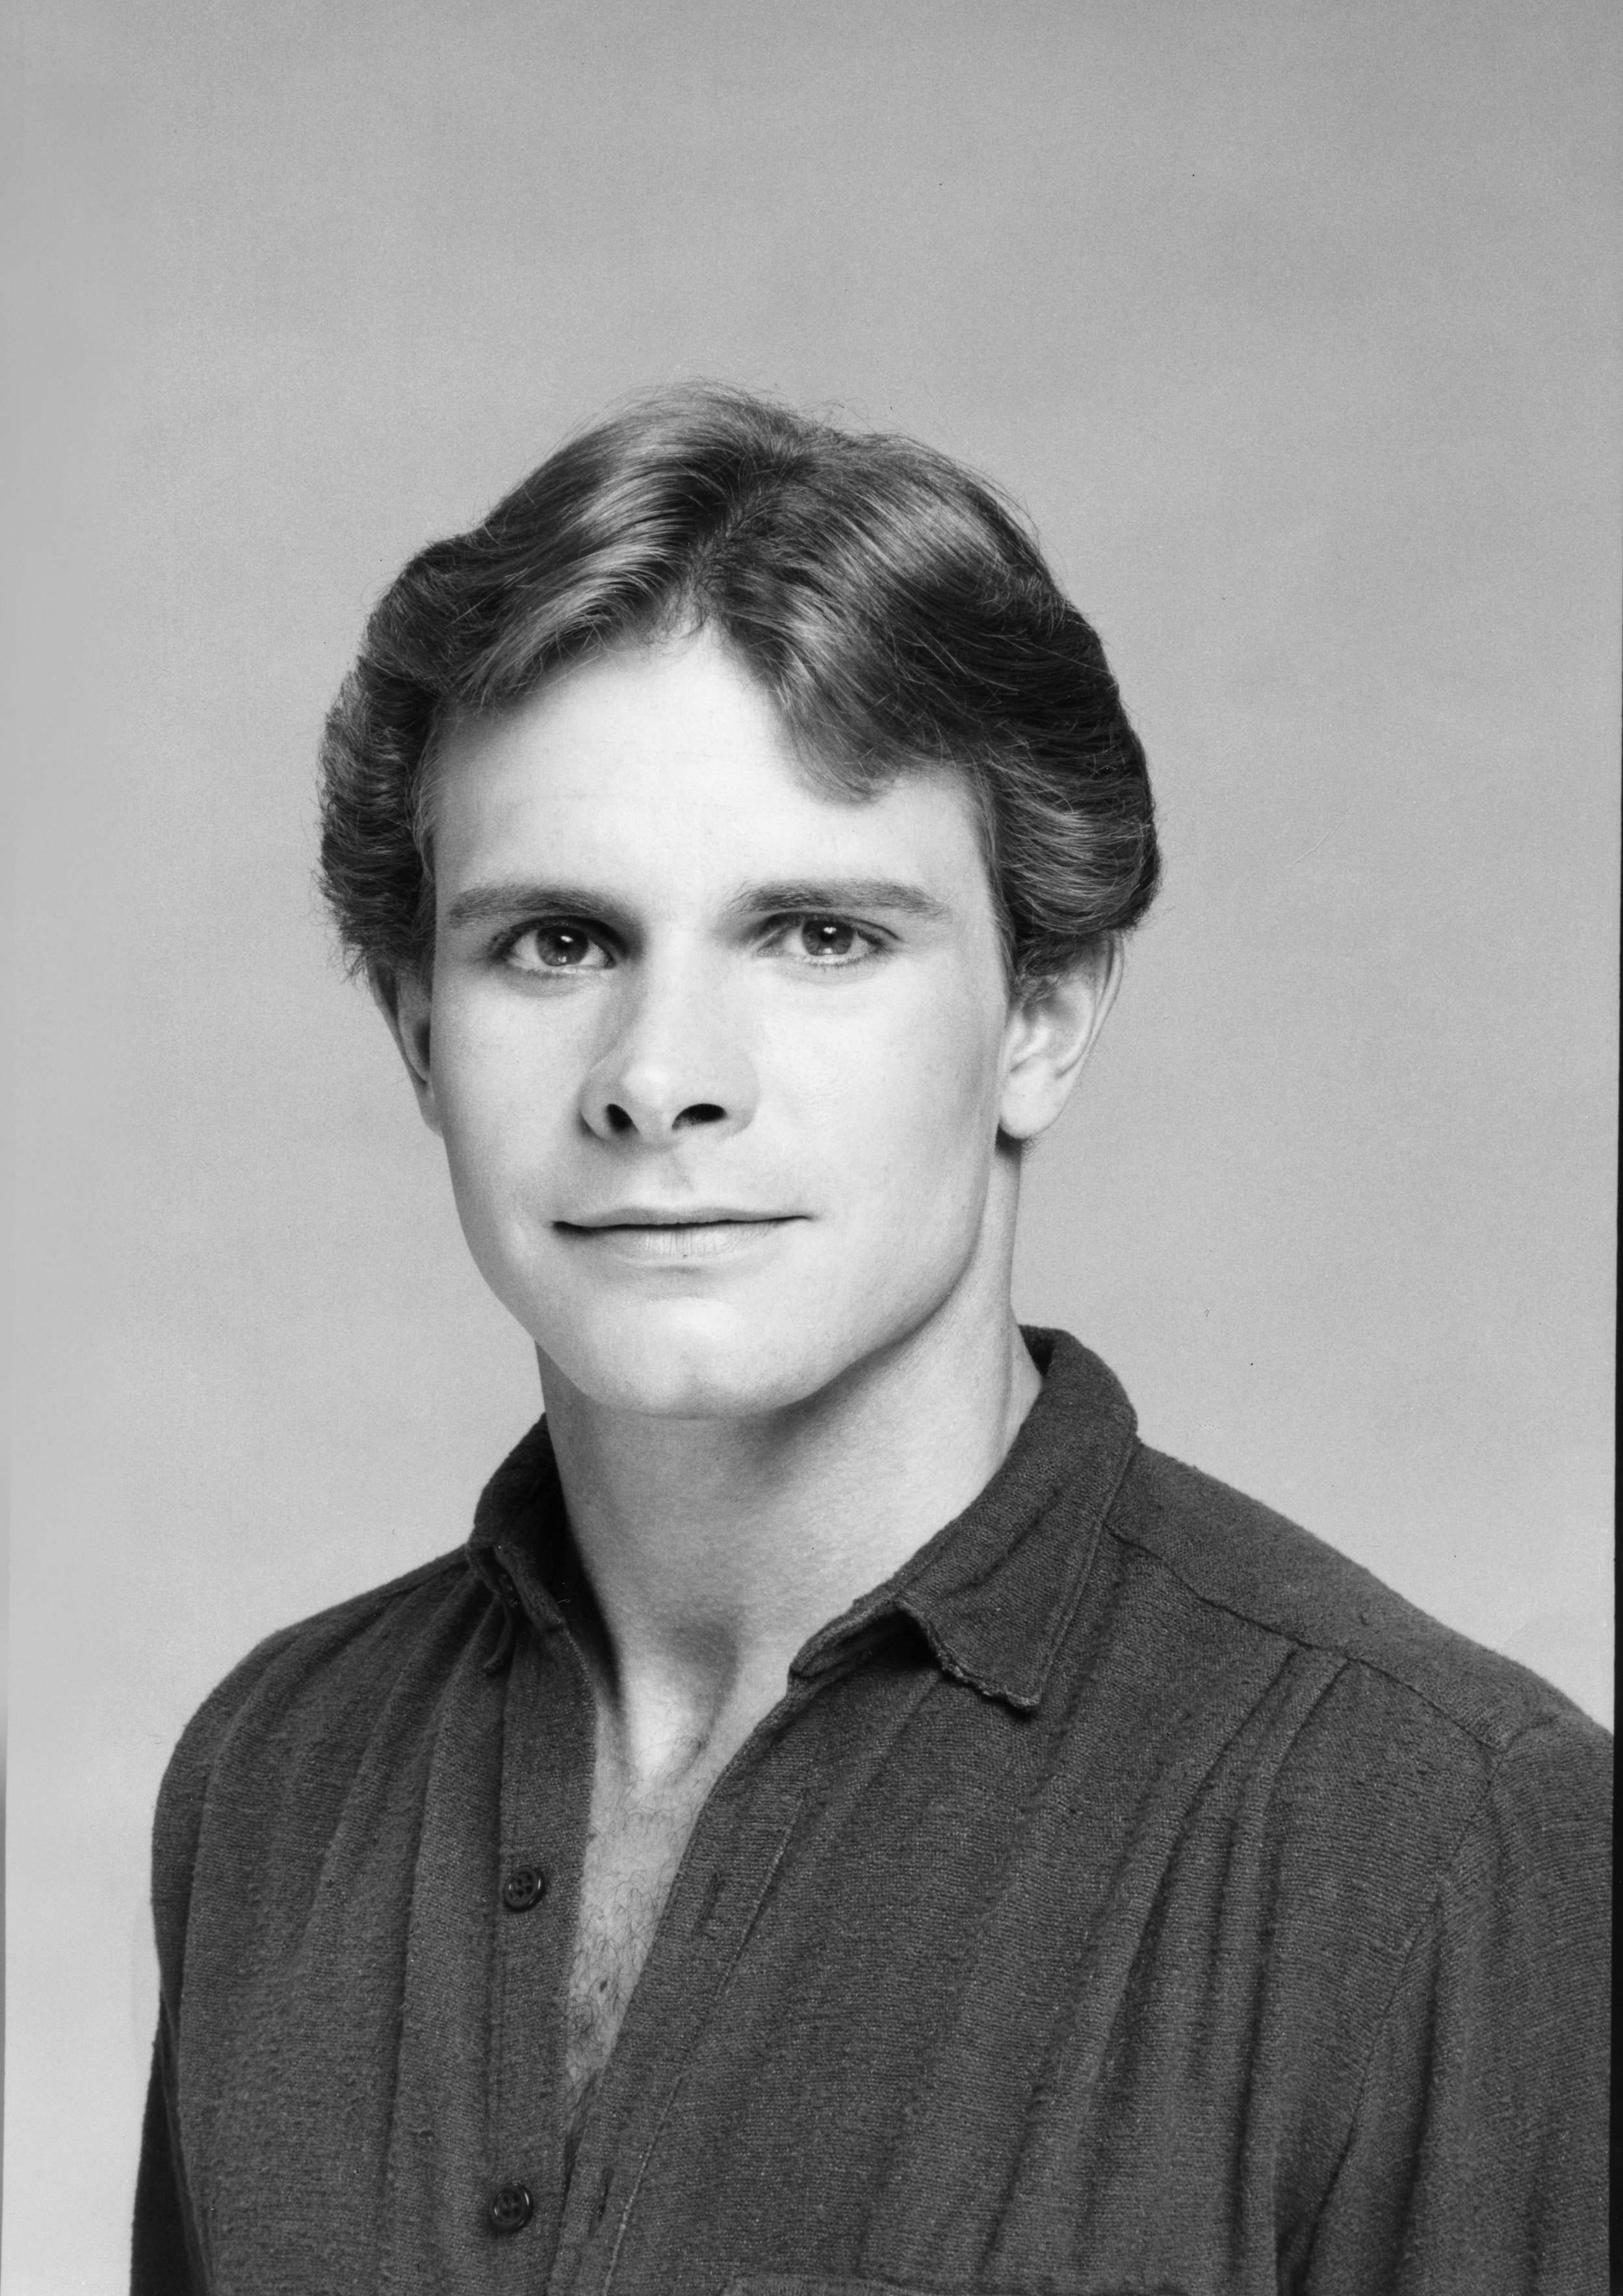 Peter Scolari for "Bosom Buddies" - Gallery - Shoot Date: June 27, 1980 | Photo: GettyImages